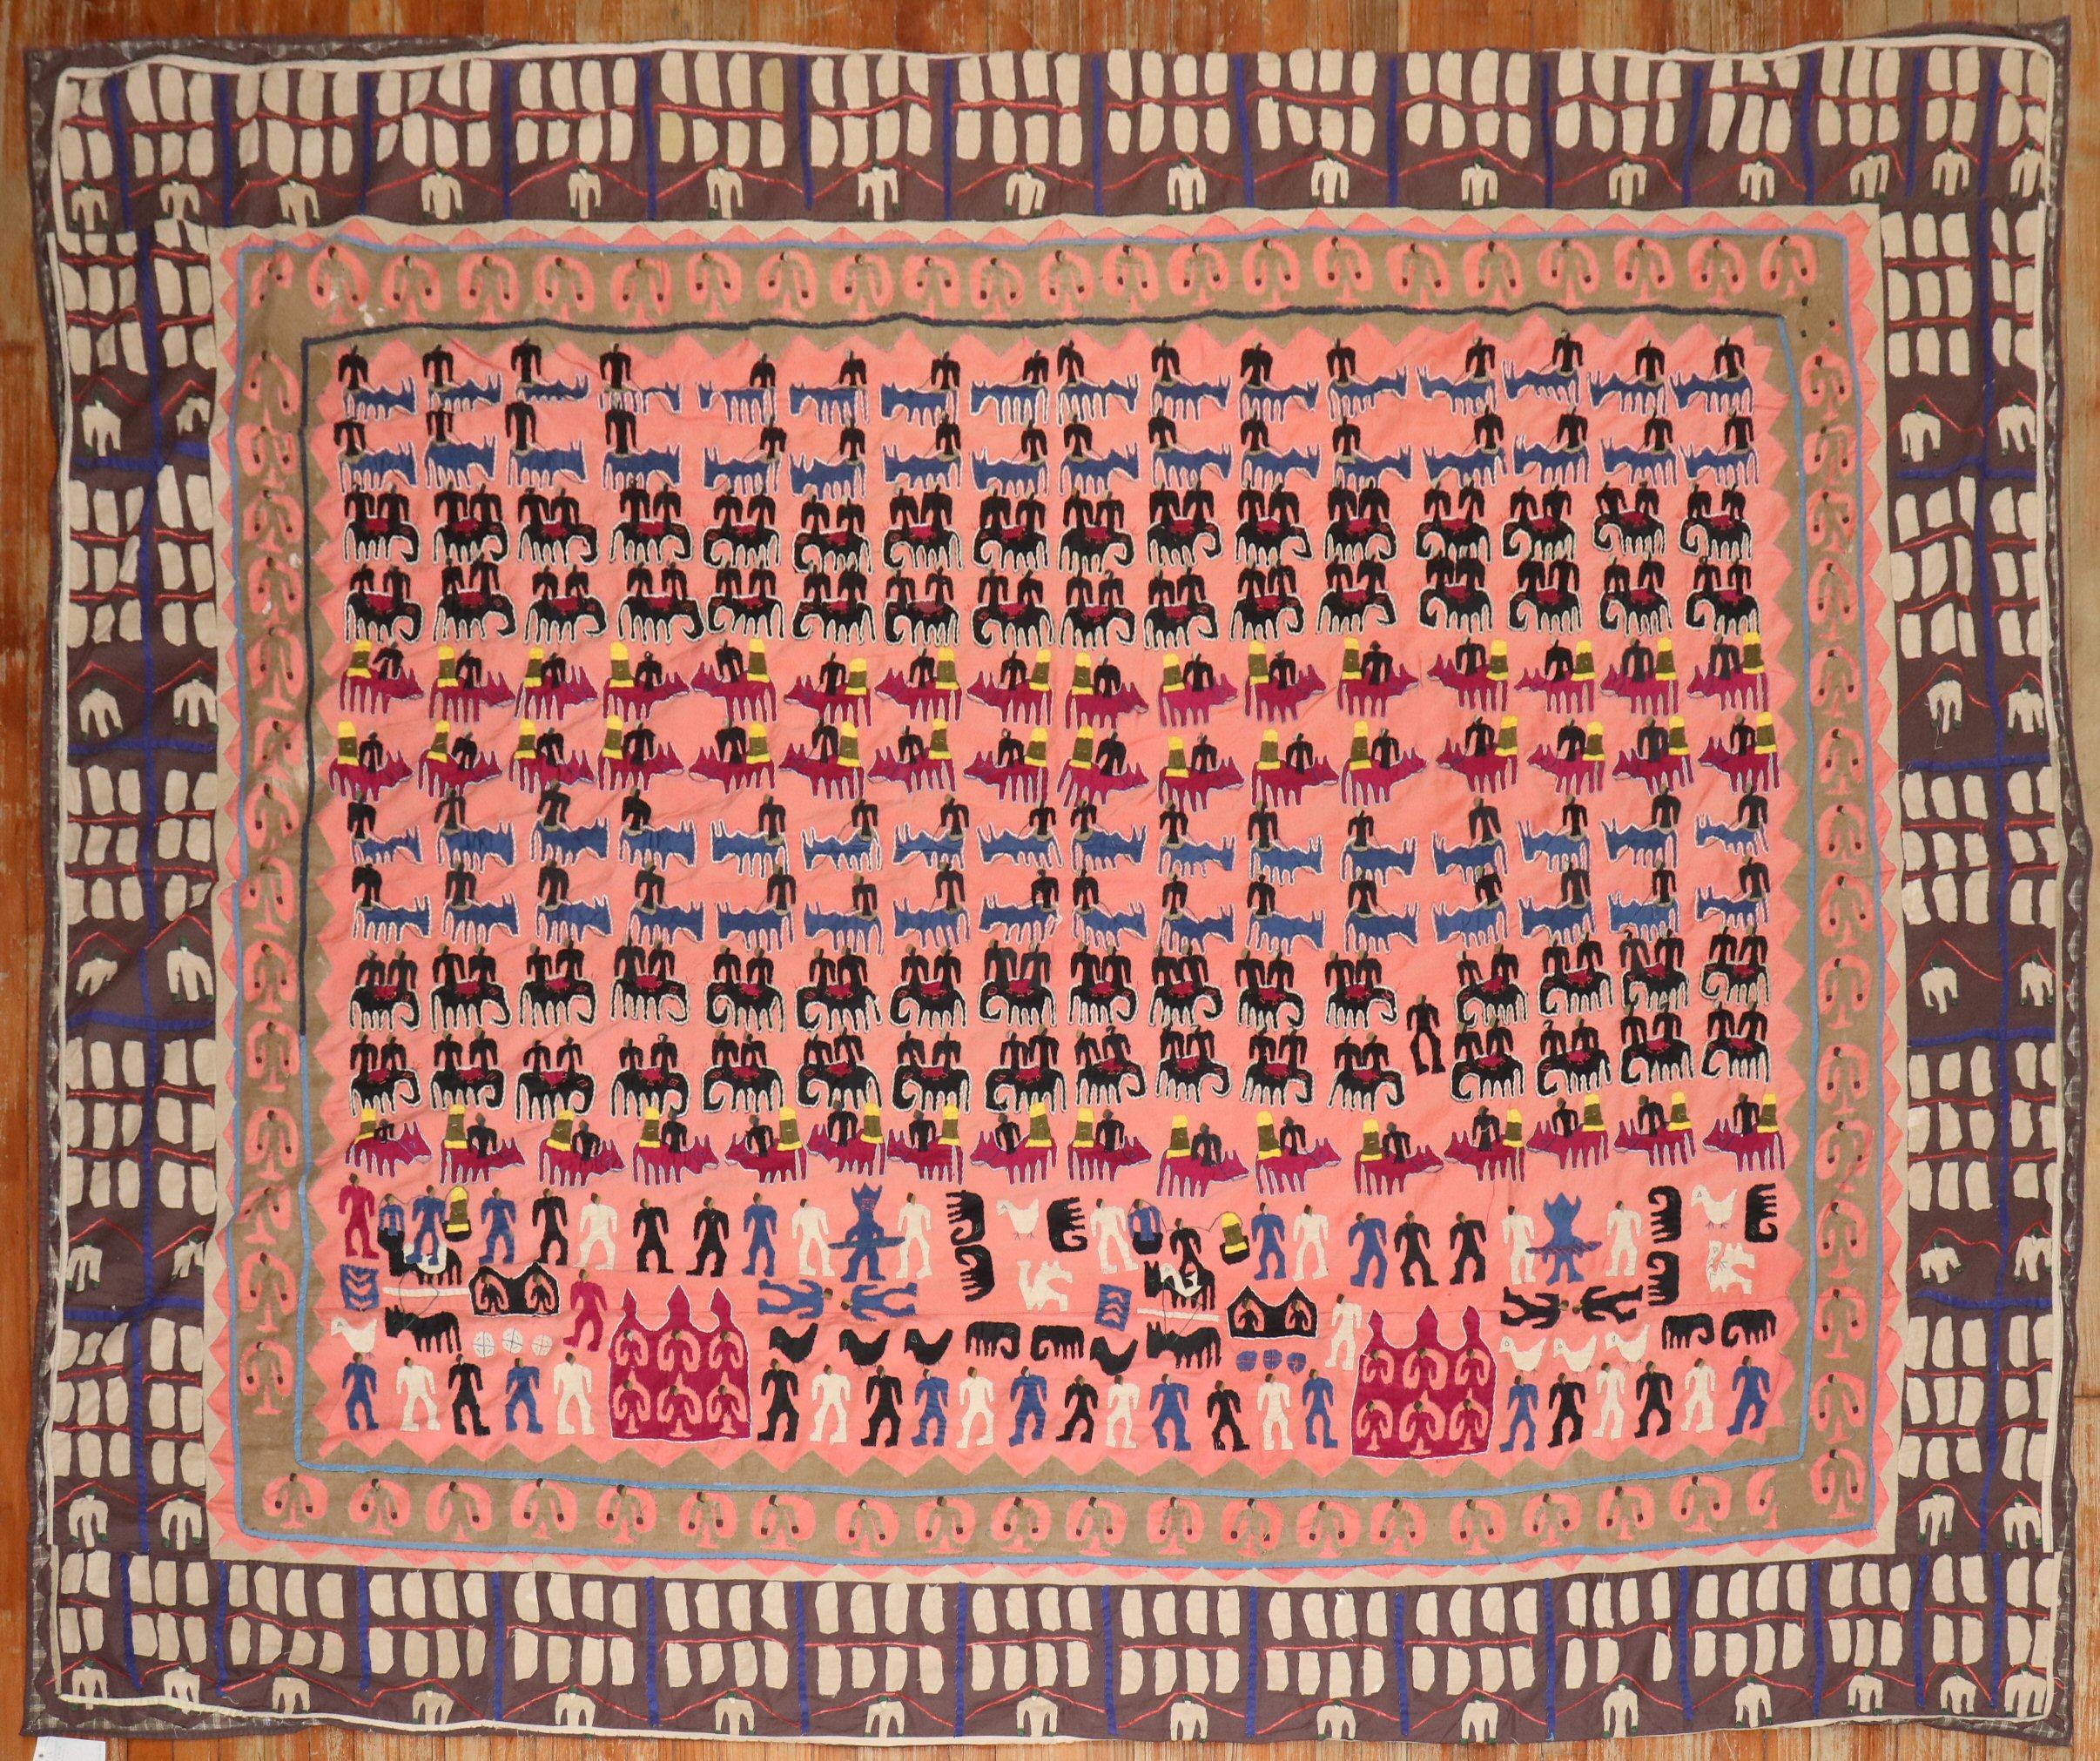 Hand-embroidered large Suzani textile made from the middle of the 20th century featuring a wild animal human pictorial motif on a pink ground


Measures: 6'10